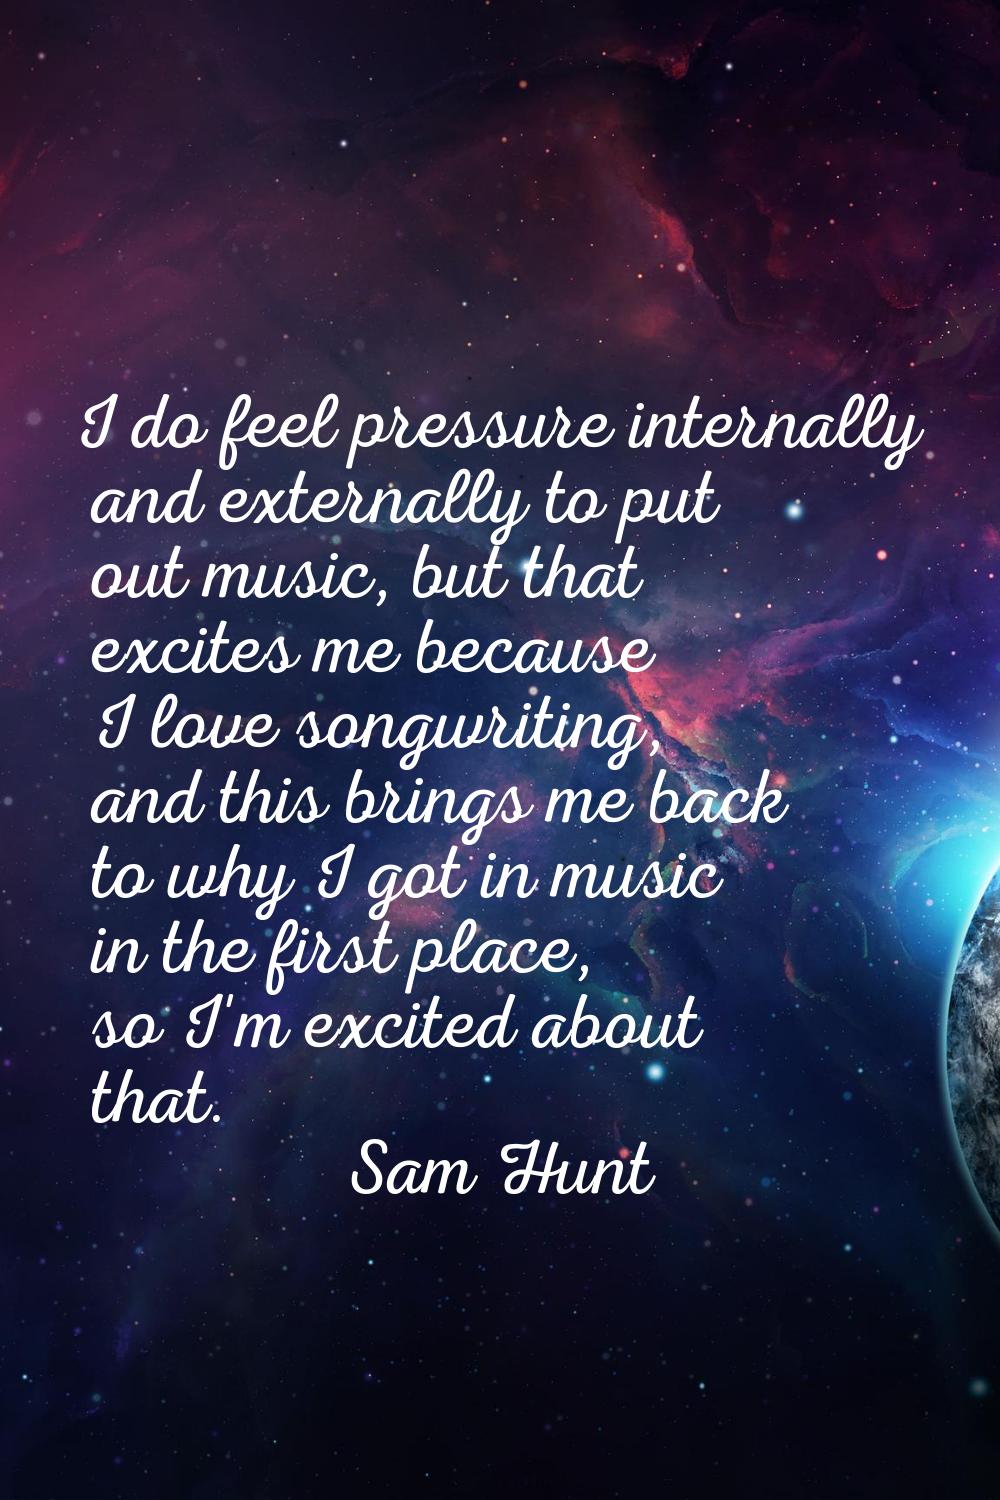 I do feel pressure internally and externally to put out music, but that excites me because I love s